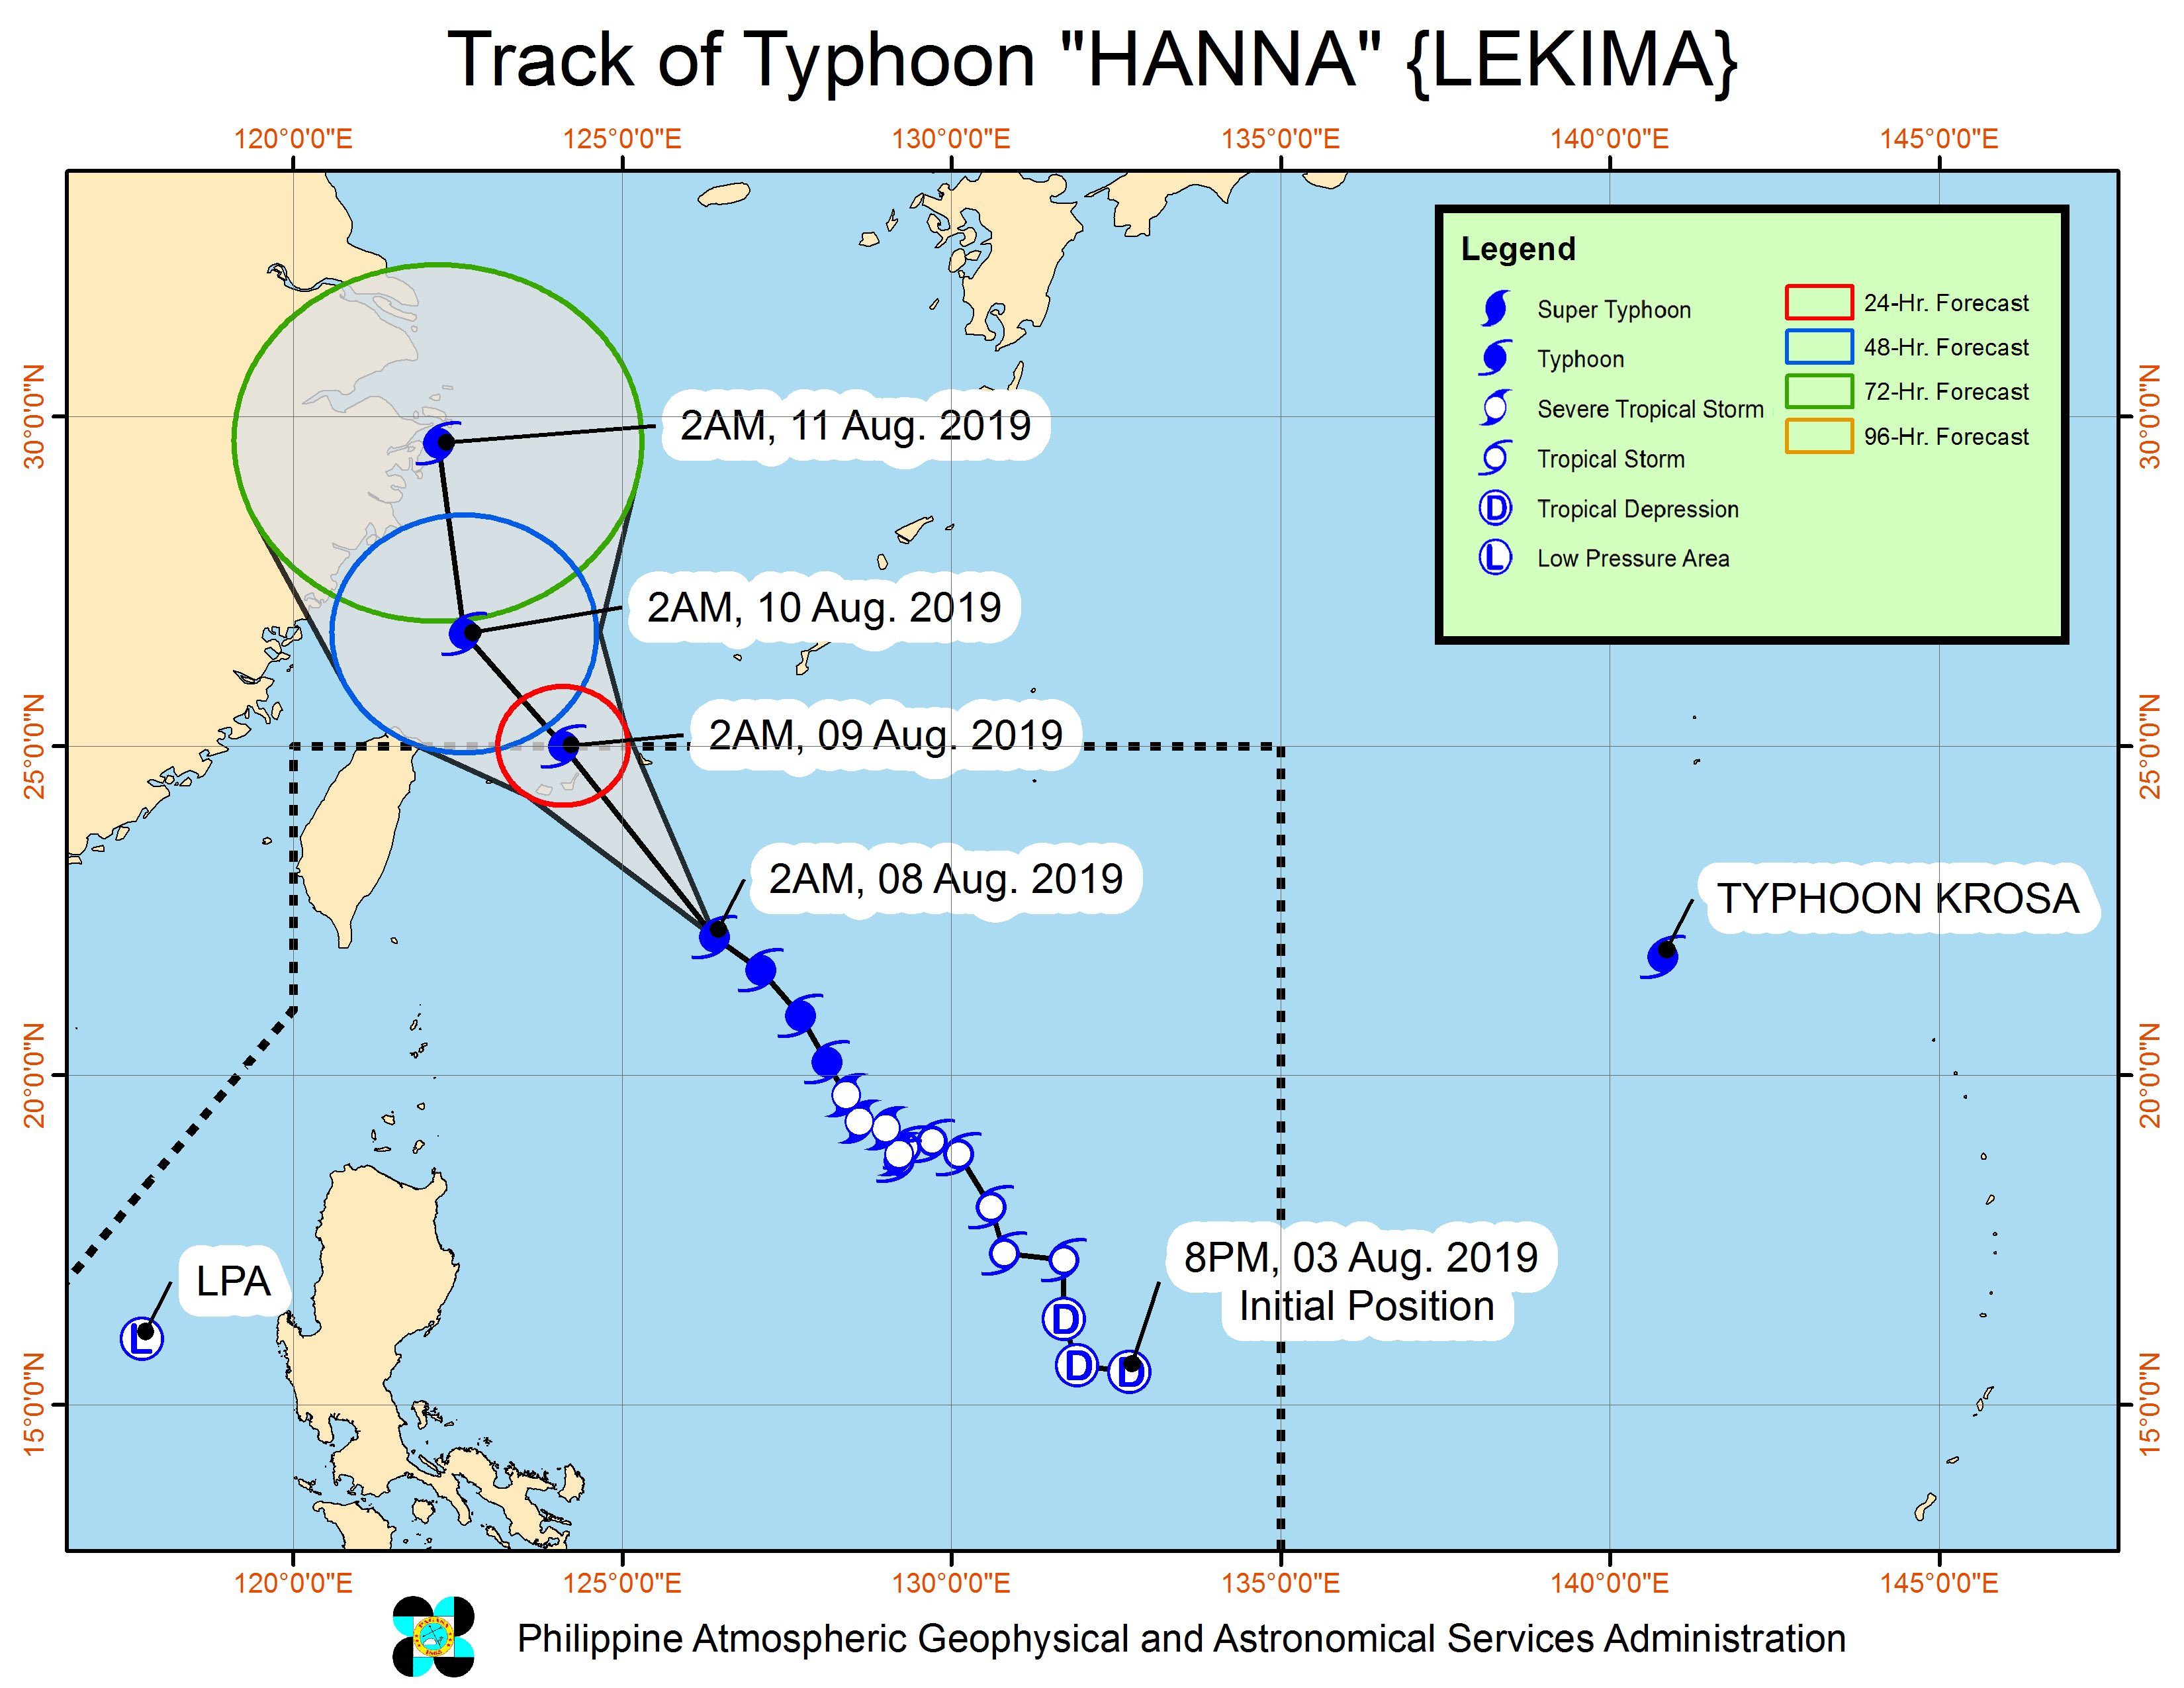 Forecast track of Typhoon Hanna (Lekima) as of August 8, 2019, 5 am. Image from PAGASA 